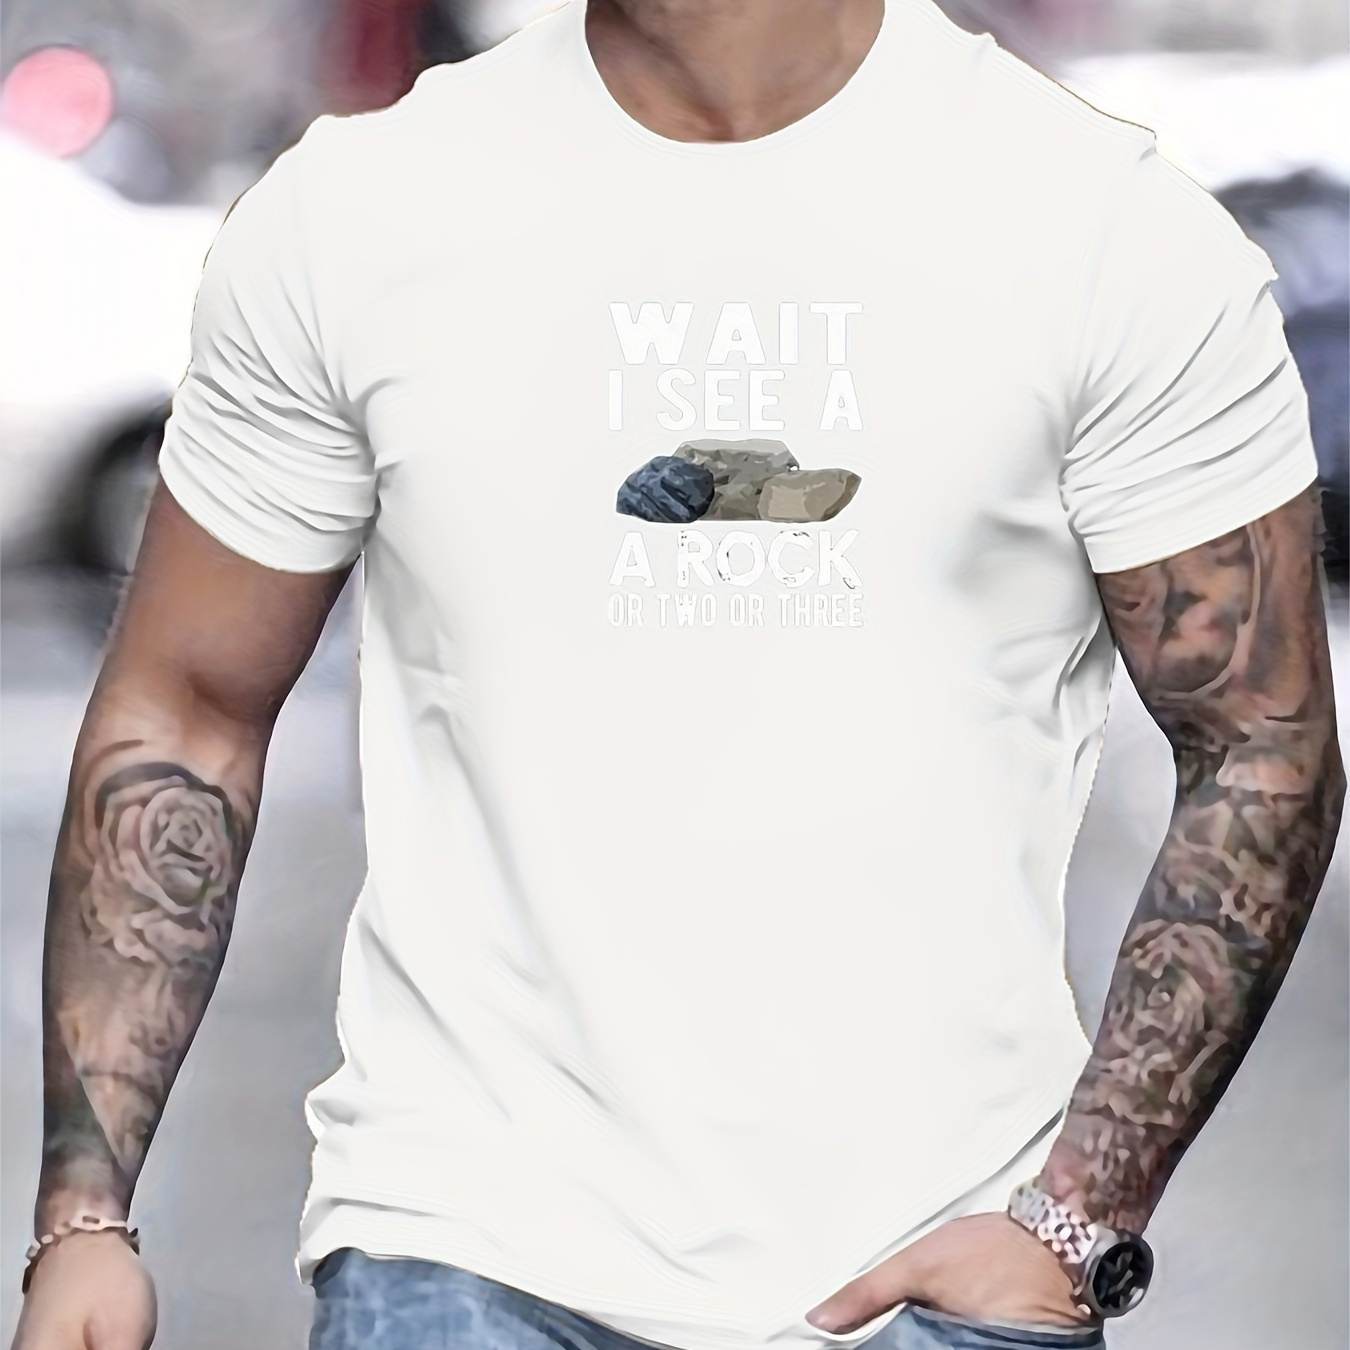 

Wait I See A Rock Print T-shirt, Tees For Men, Casual Short Sleeve T-shirt For Summer